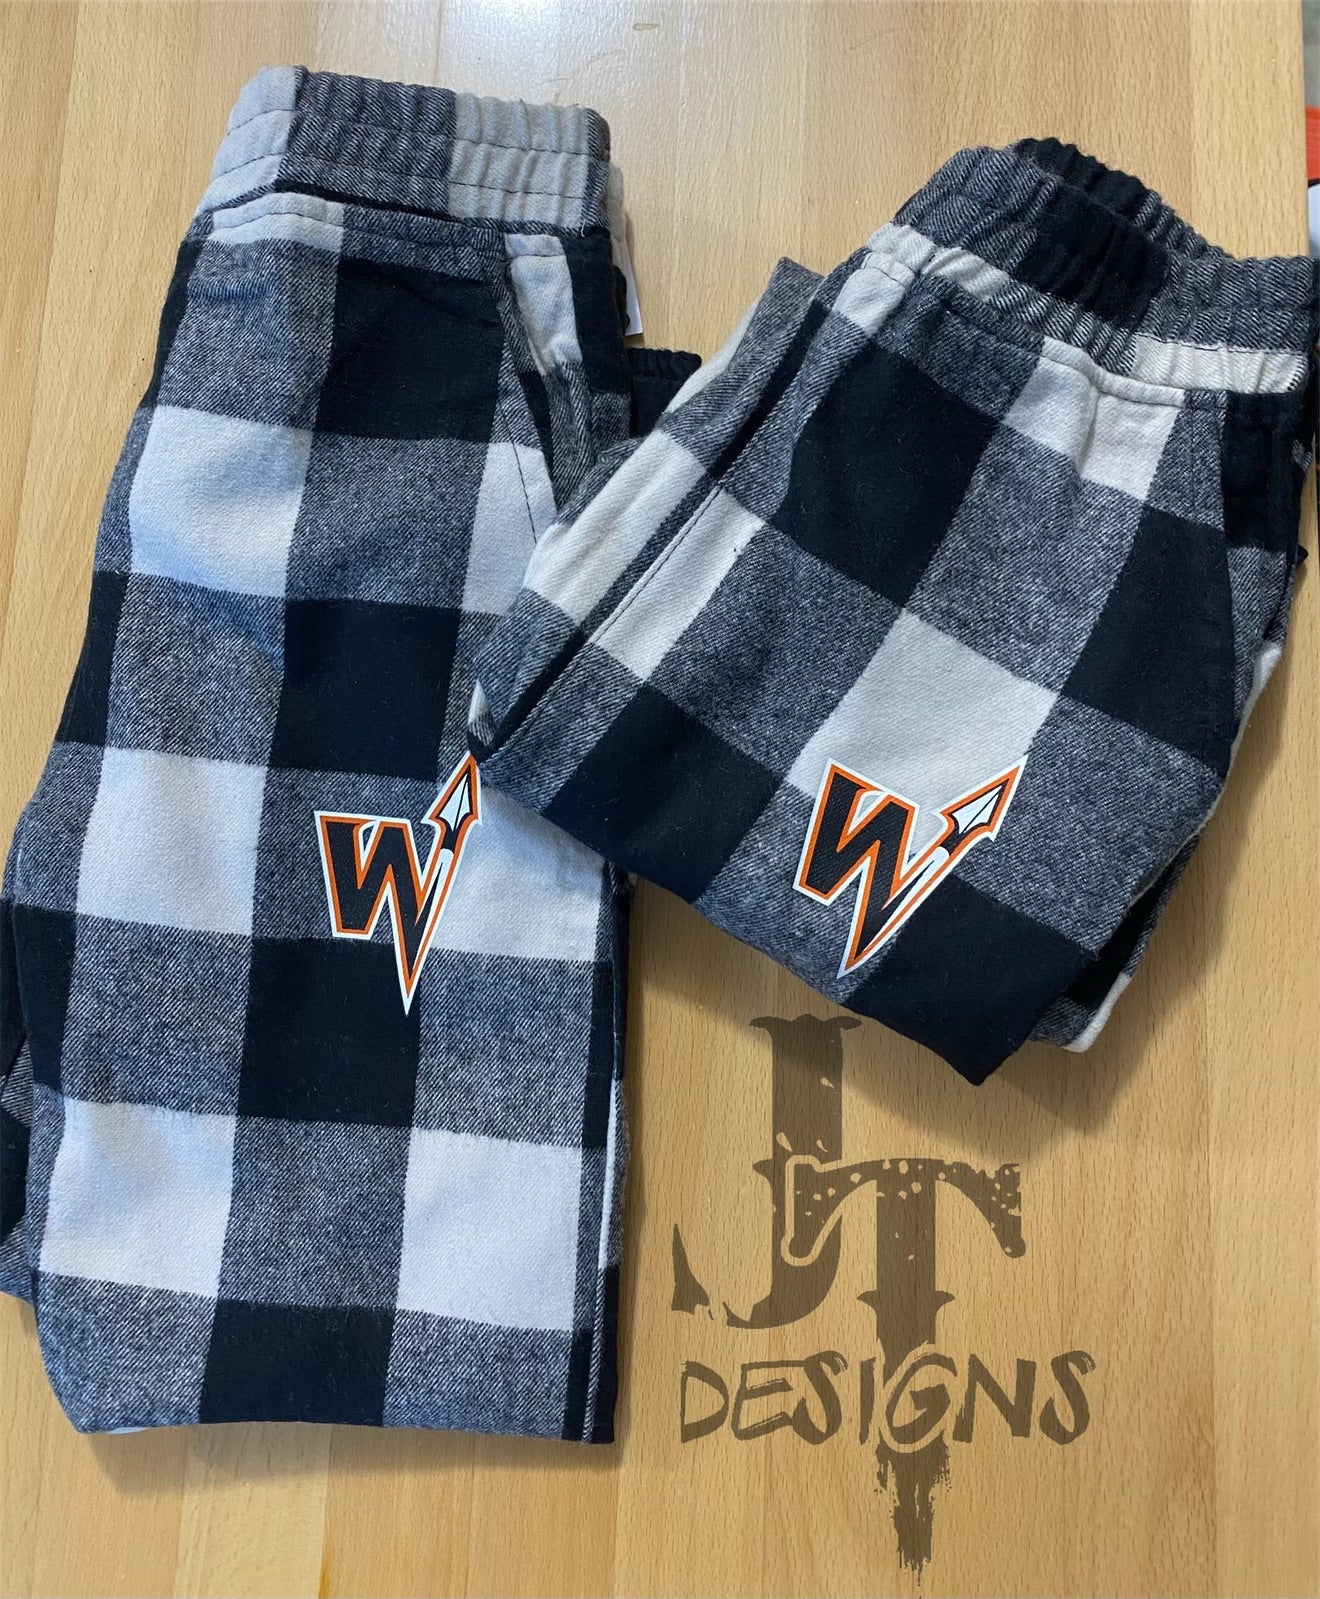 Flannel Joggers